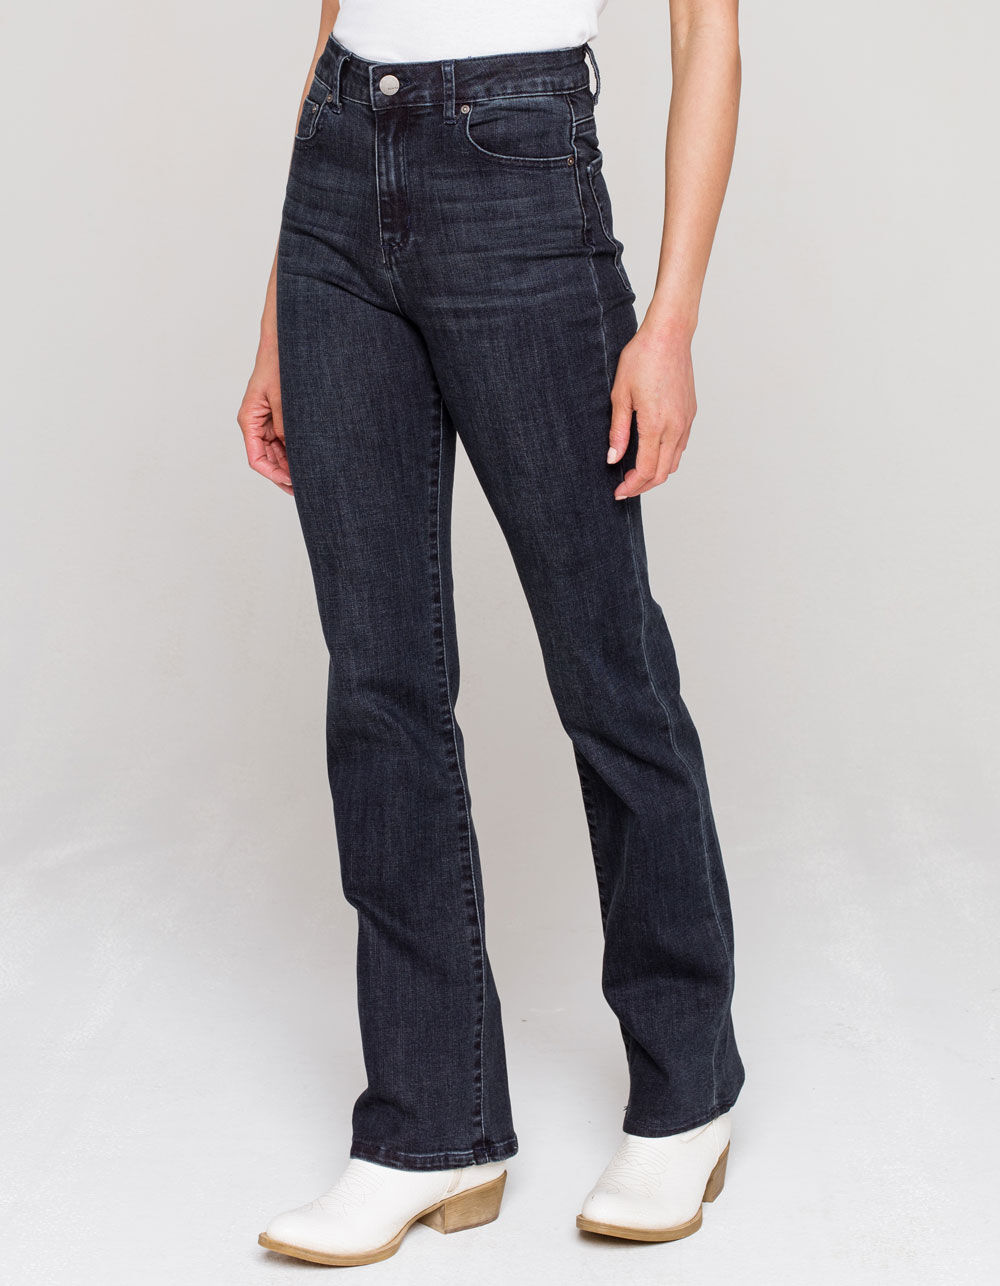 TRACTR Basic High Rise Womens Bootcut Jeans - DARK WASH | Tillys